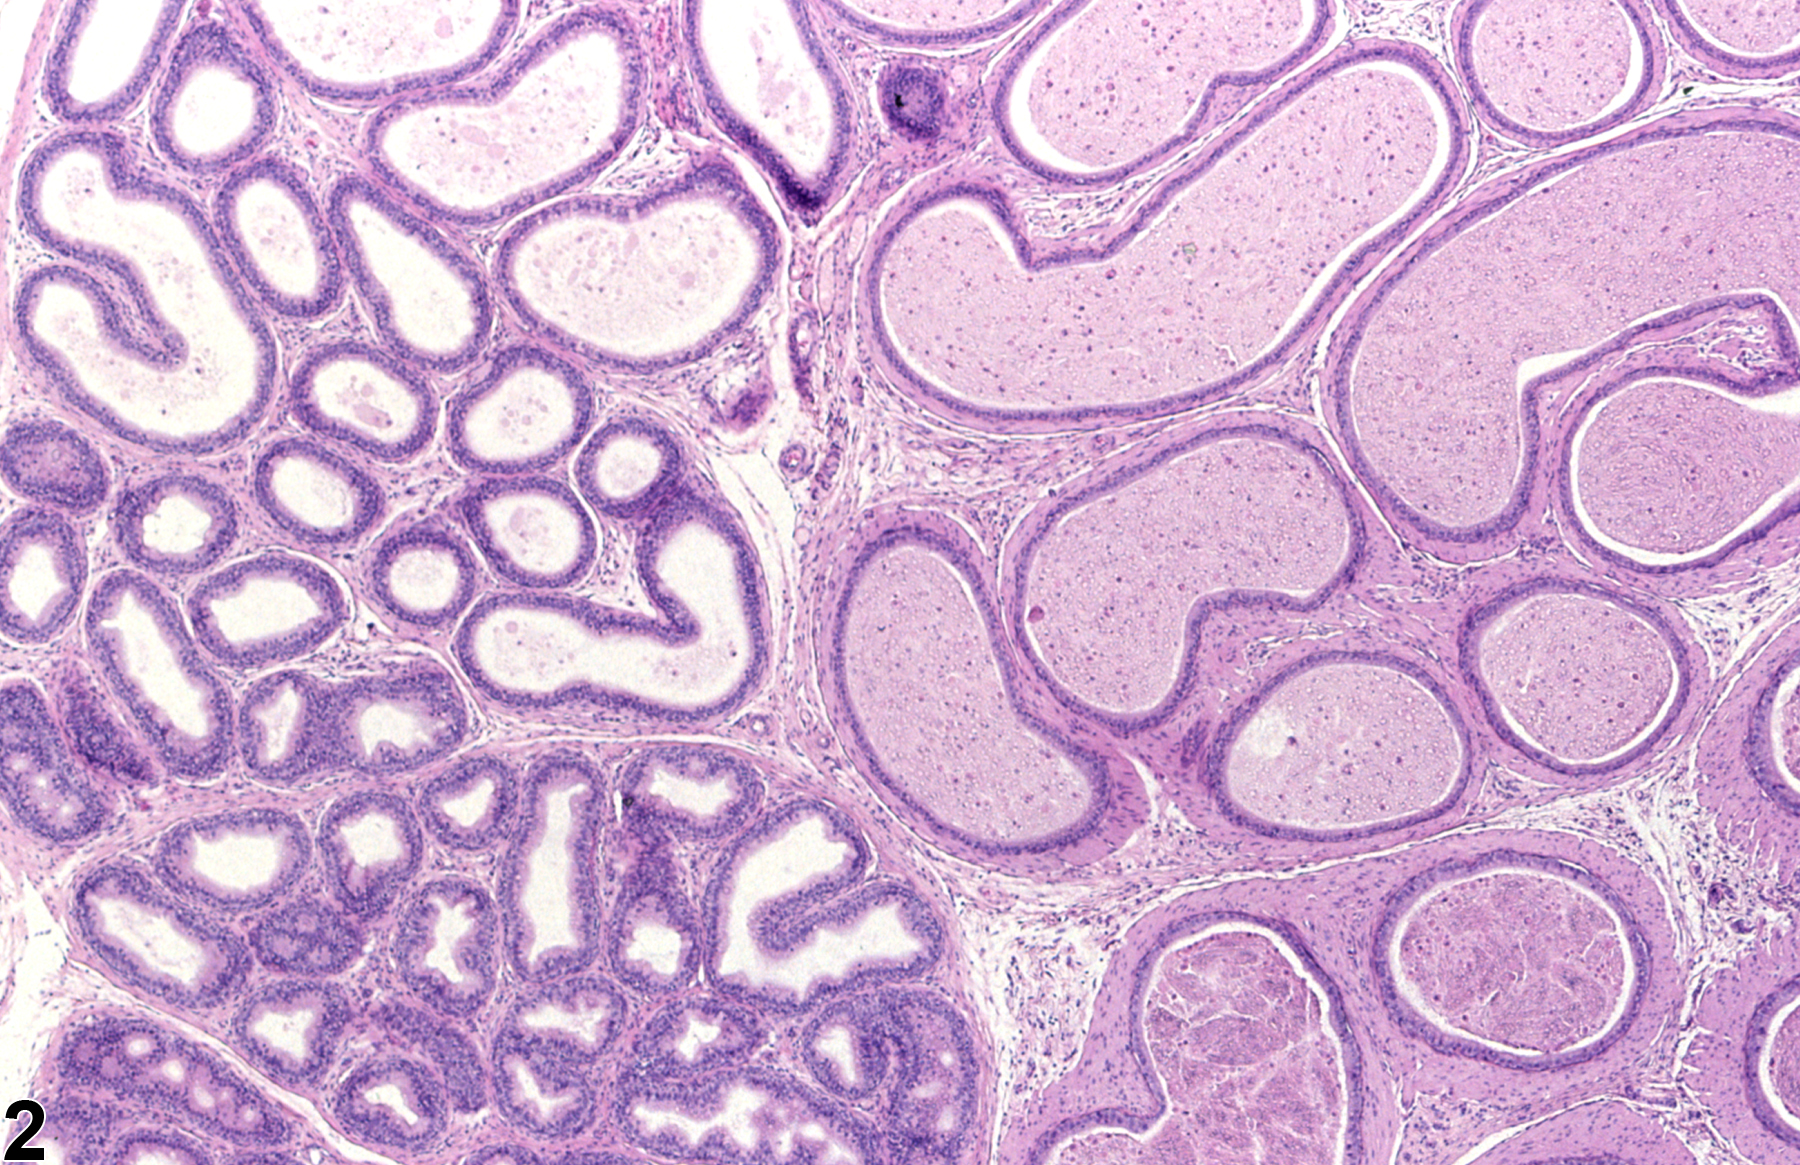 Image of duct atrophy in the epididymis from a male F344/N rat in a subchronic study